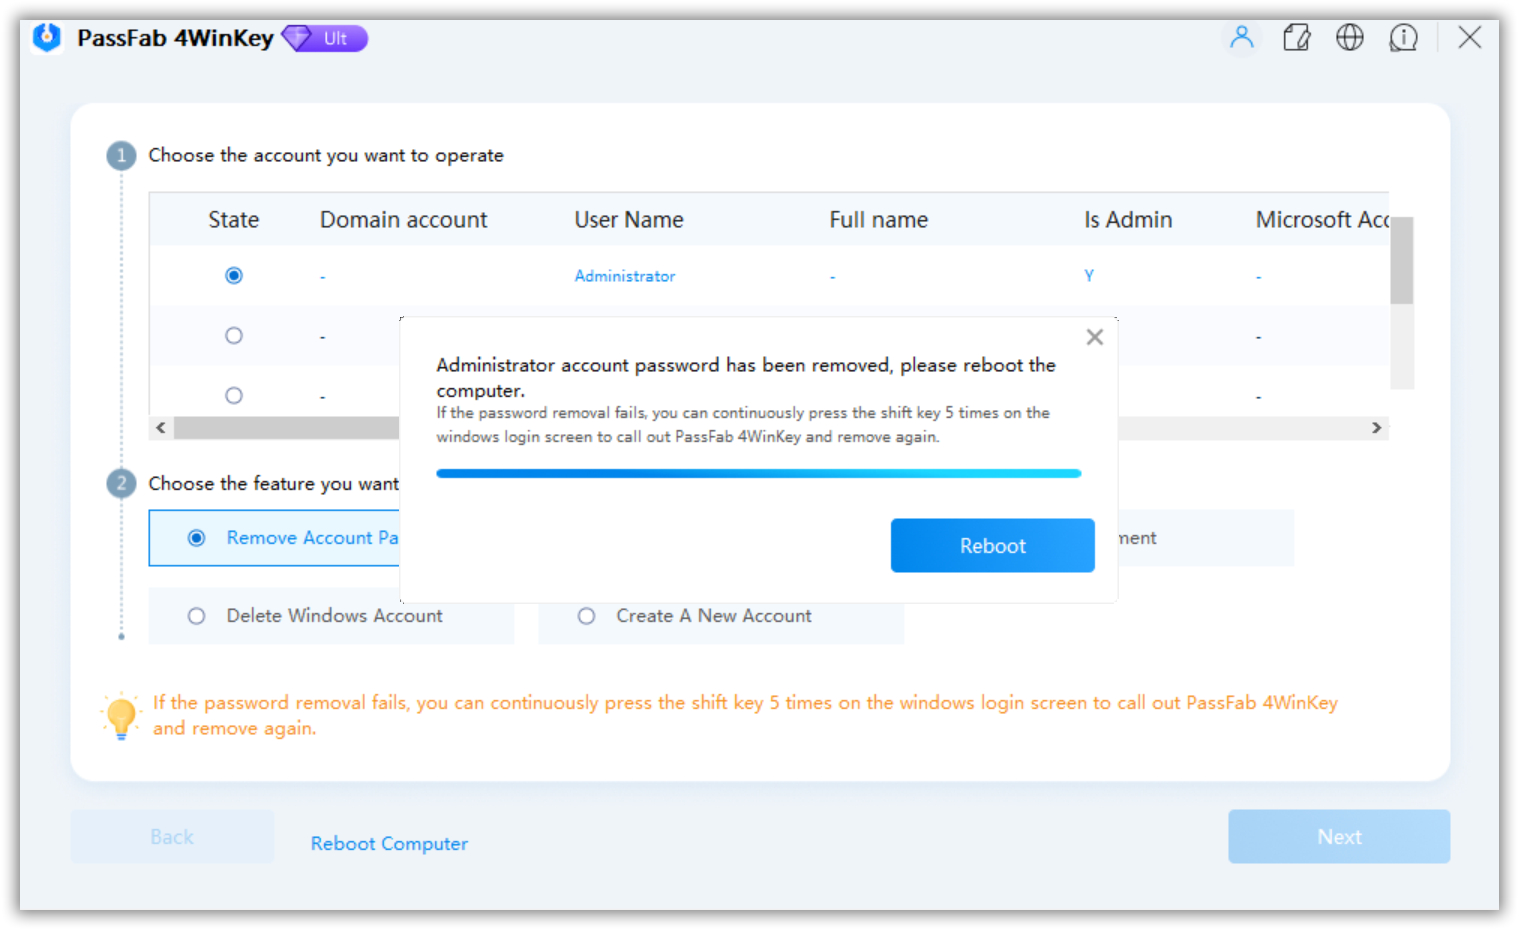 how to find skype password without resetting it